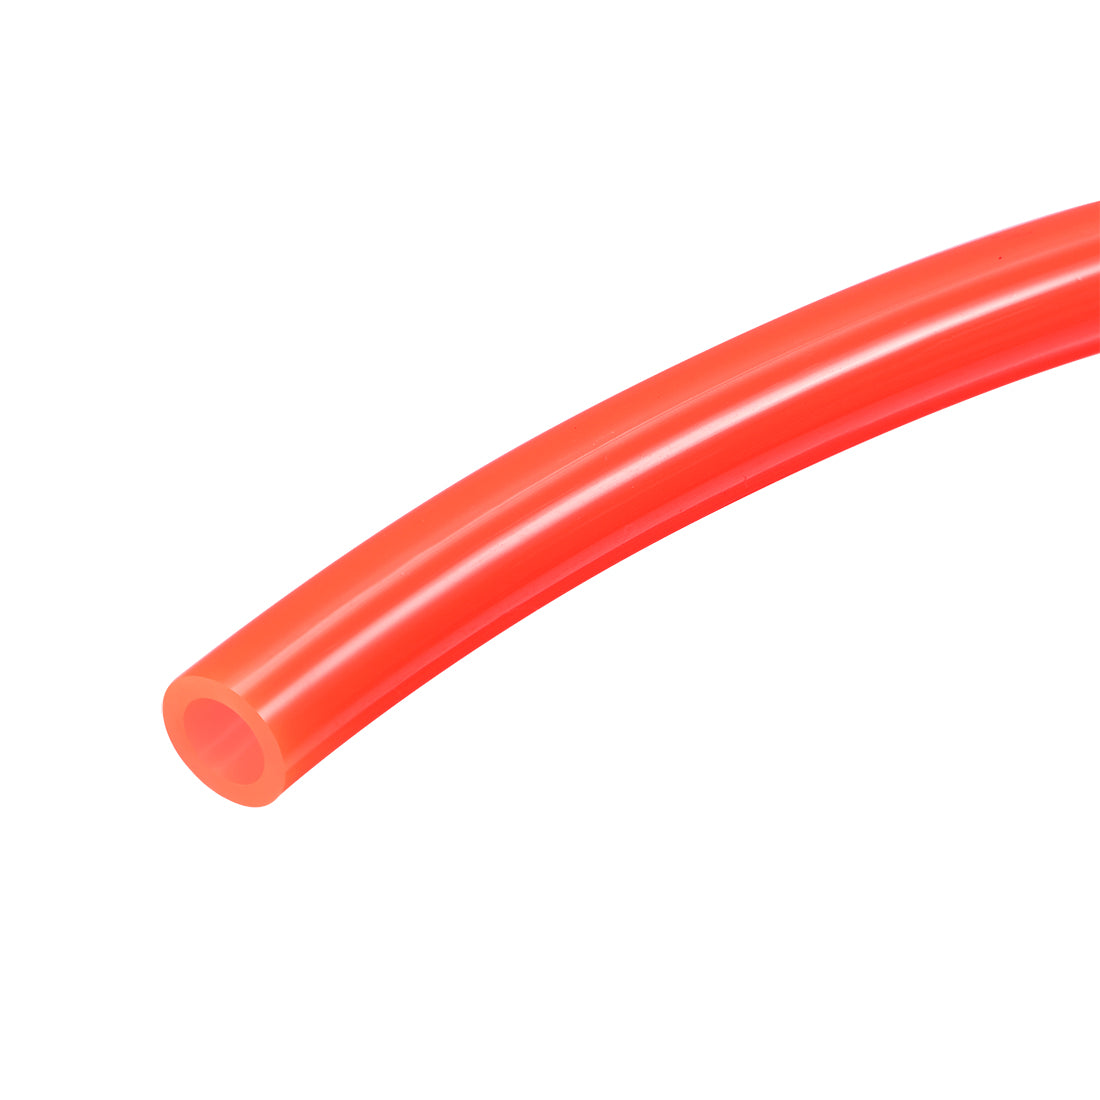 uxcell Uxcell Pneumatic Hose Tubing,6mm OD 4mm ID,Polyurethane PU Air Hose Pipe Tube,2 Meter 6.56ft,Red